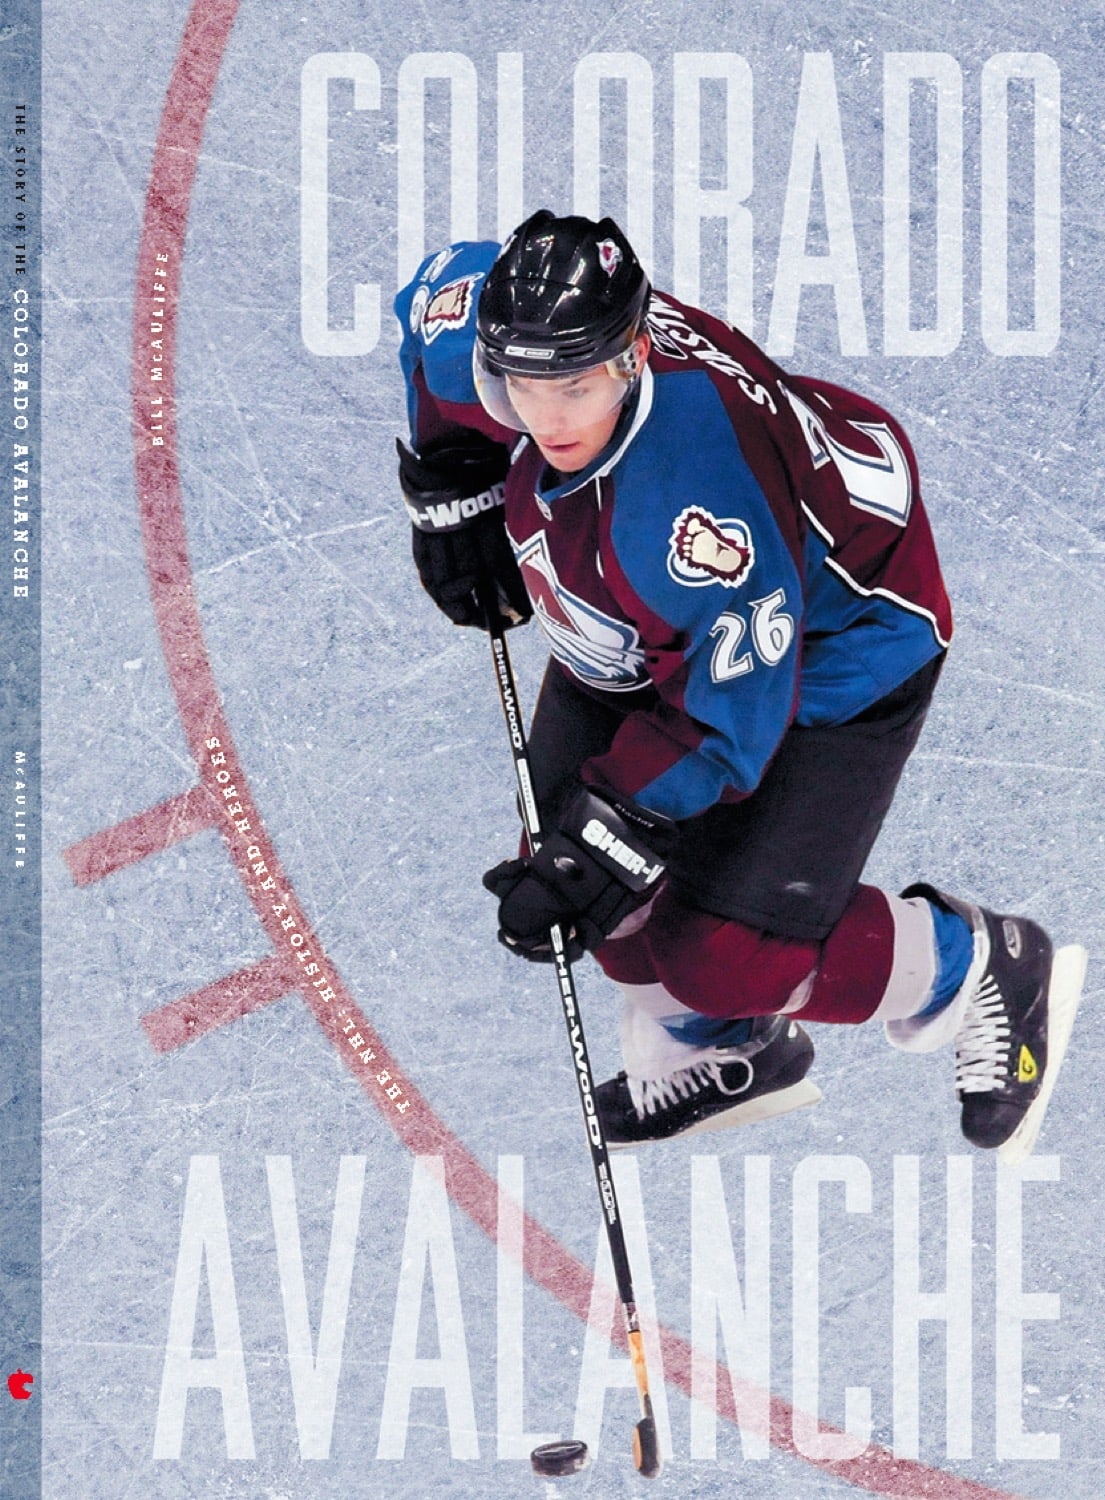 The NHL: History and Heroes: The Story of the Colorado Avalanche by The Creative Company Shop